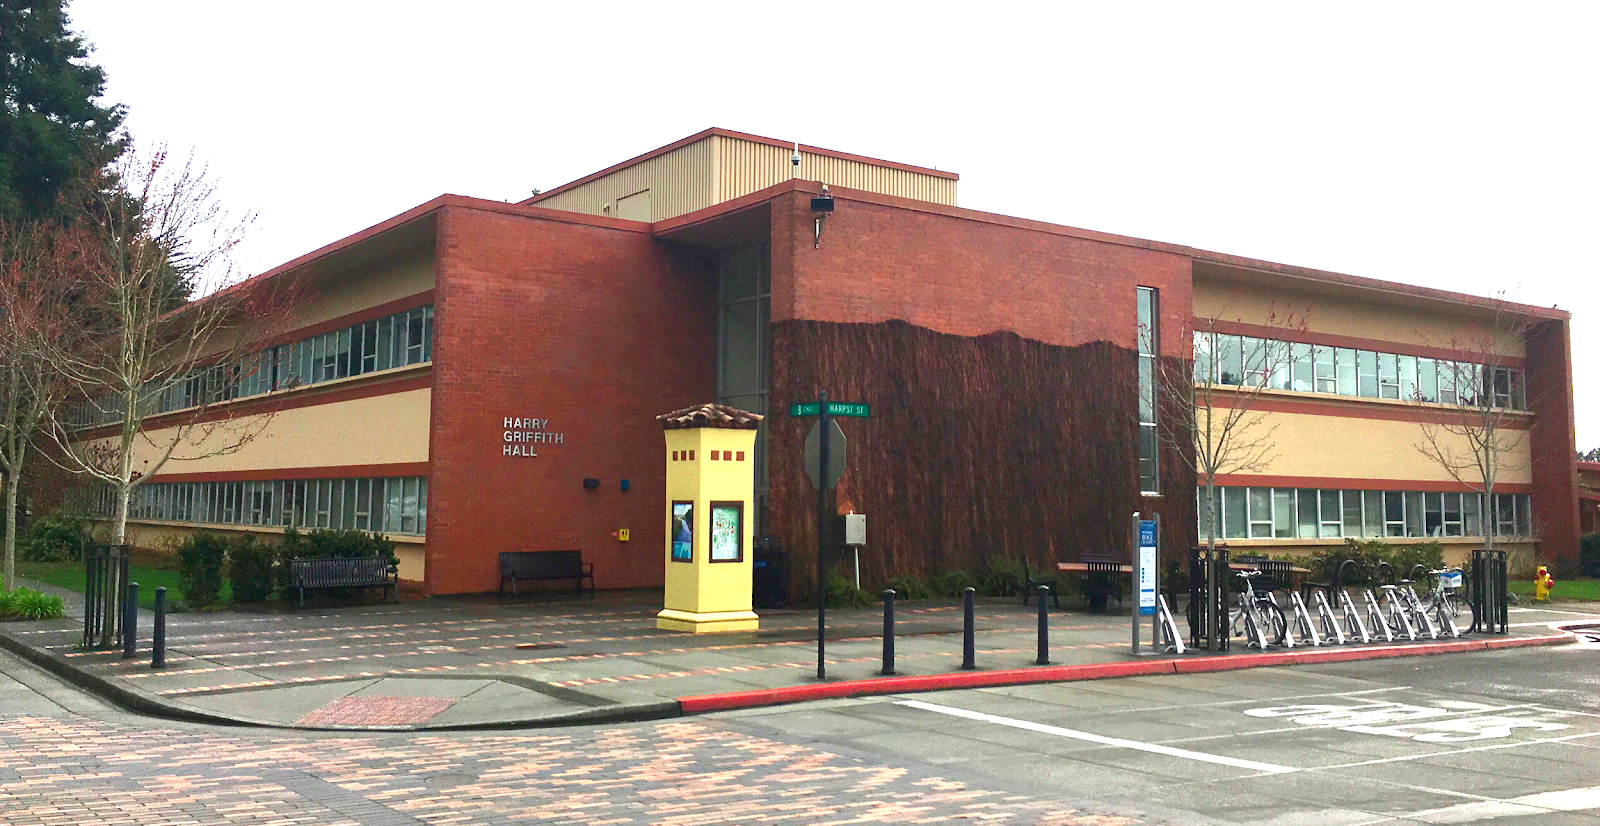 Harry Griffith Hall, one of the buildings on Humboldt campus